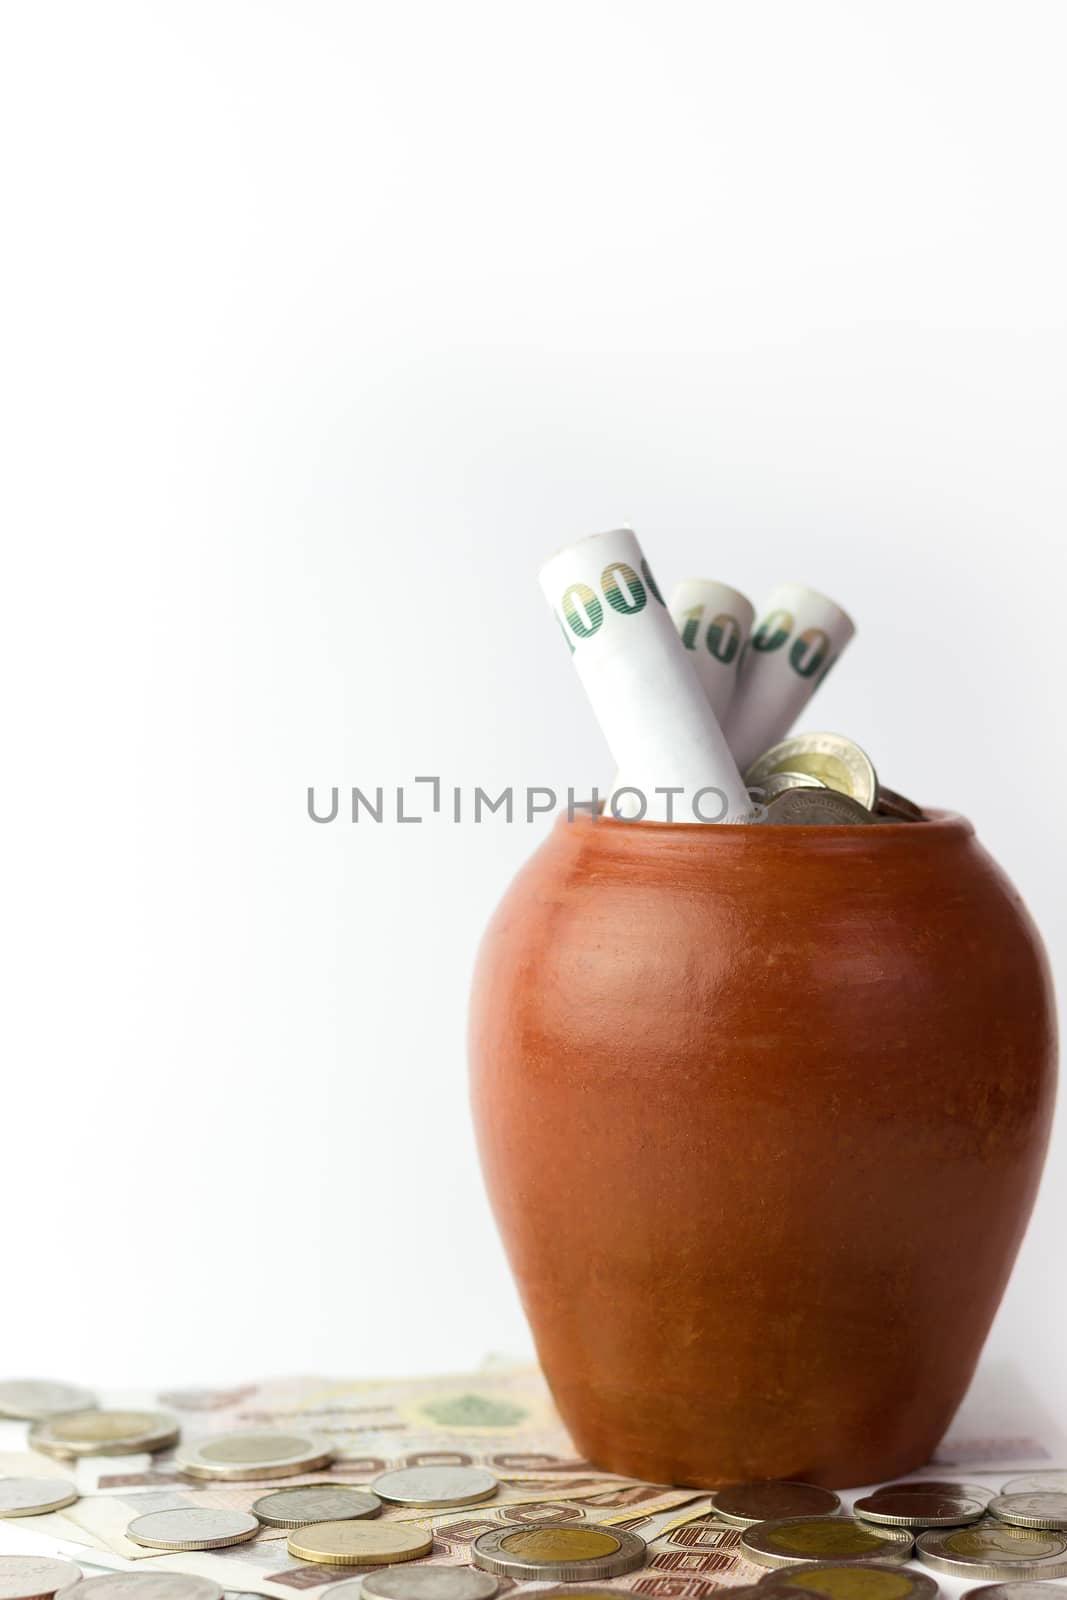 Banknotes are rolled into pot or jar is a kind of pottery and coins are stacked on the white background. The concept of business and save money for a good future.